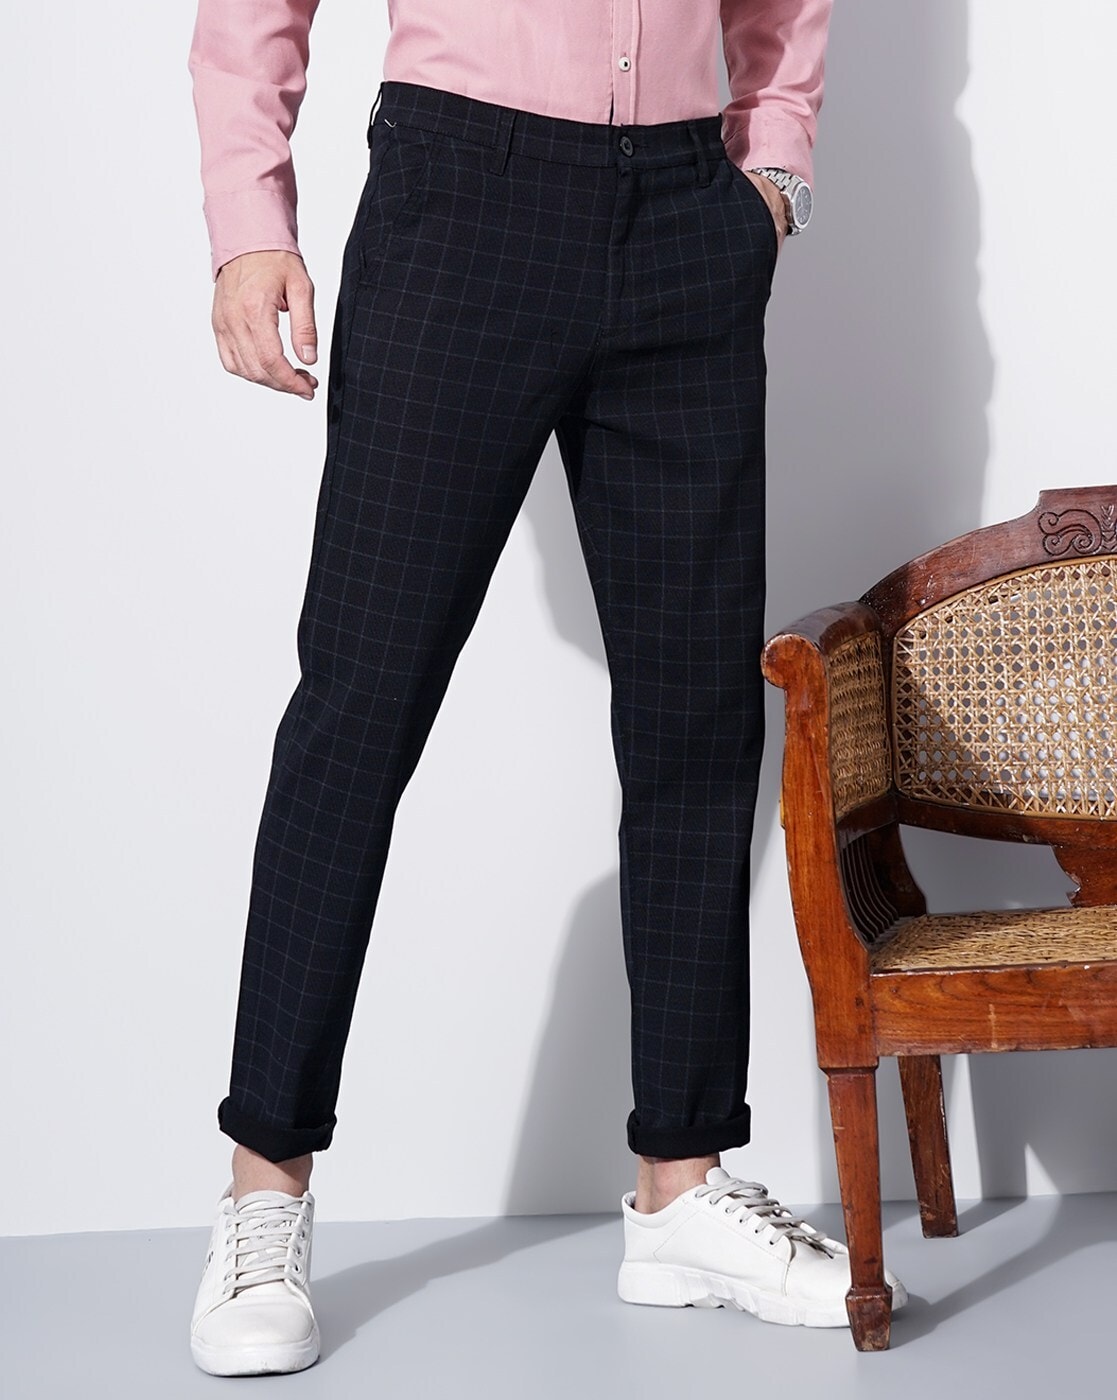 Buy Men's Fashion Plaid Pants Grey Online in India - Etsy